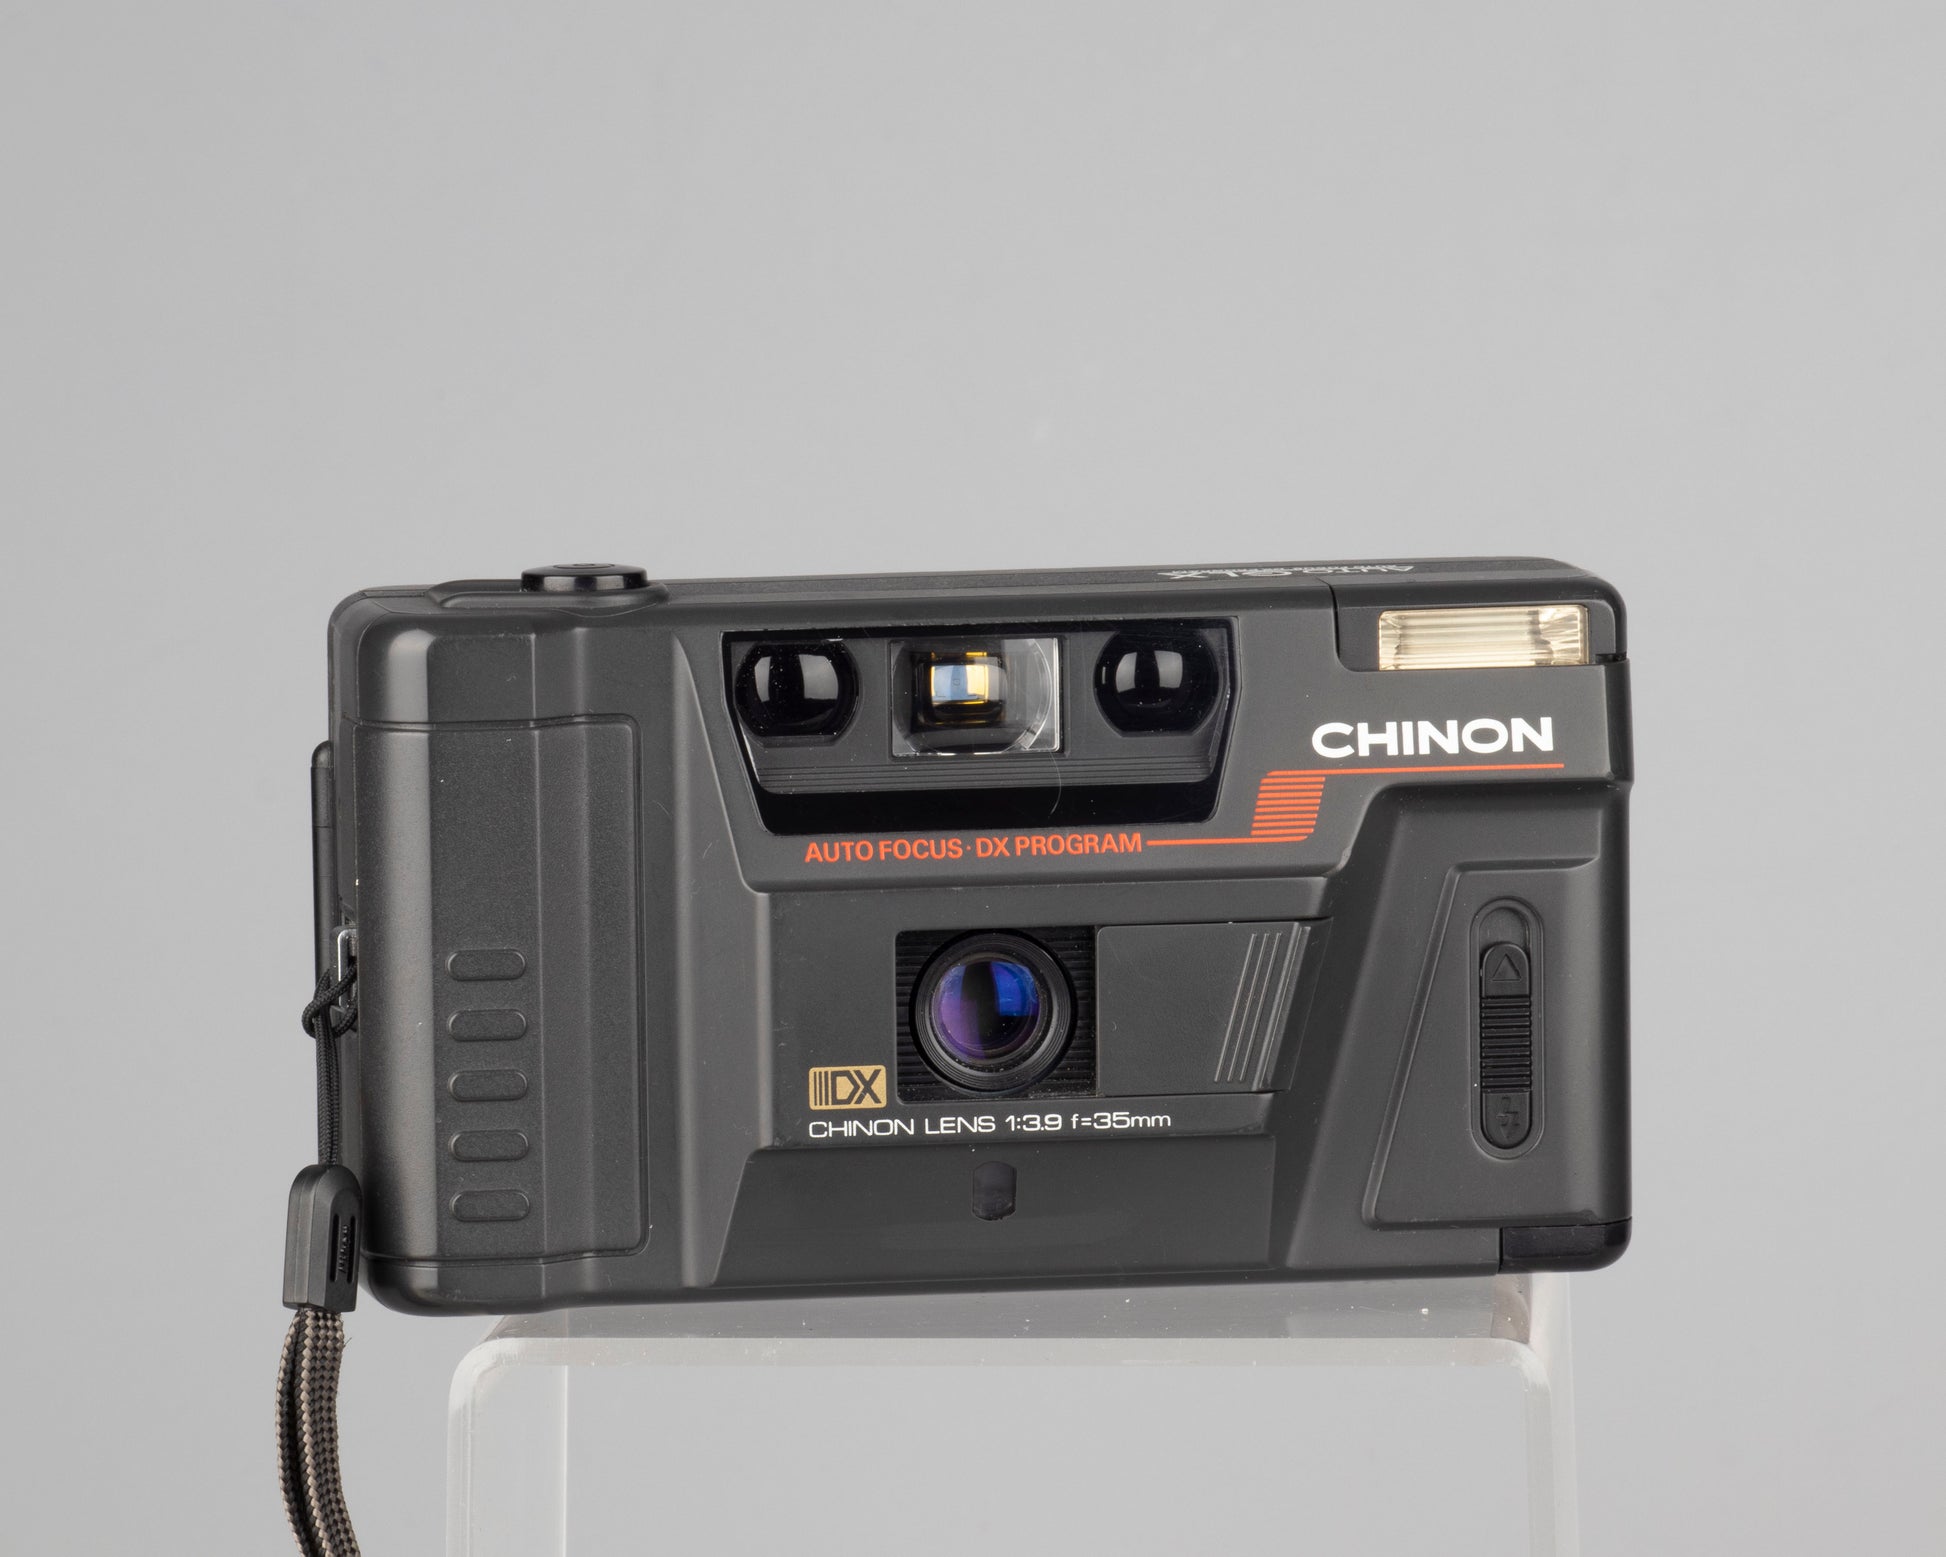 The Chinon Auto GLX is a Japanese-made 35mm point-and-shoot featuring a 35mm f3.9 lens